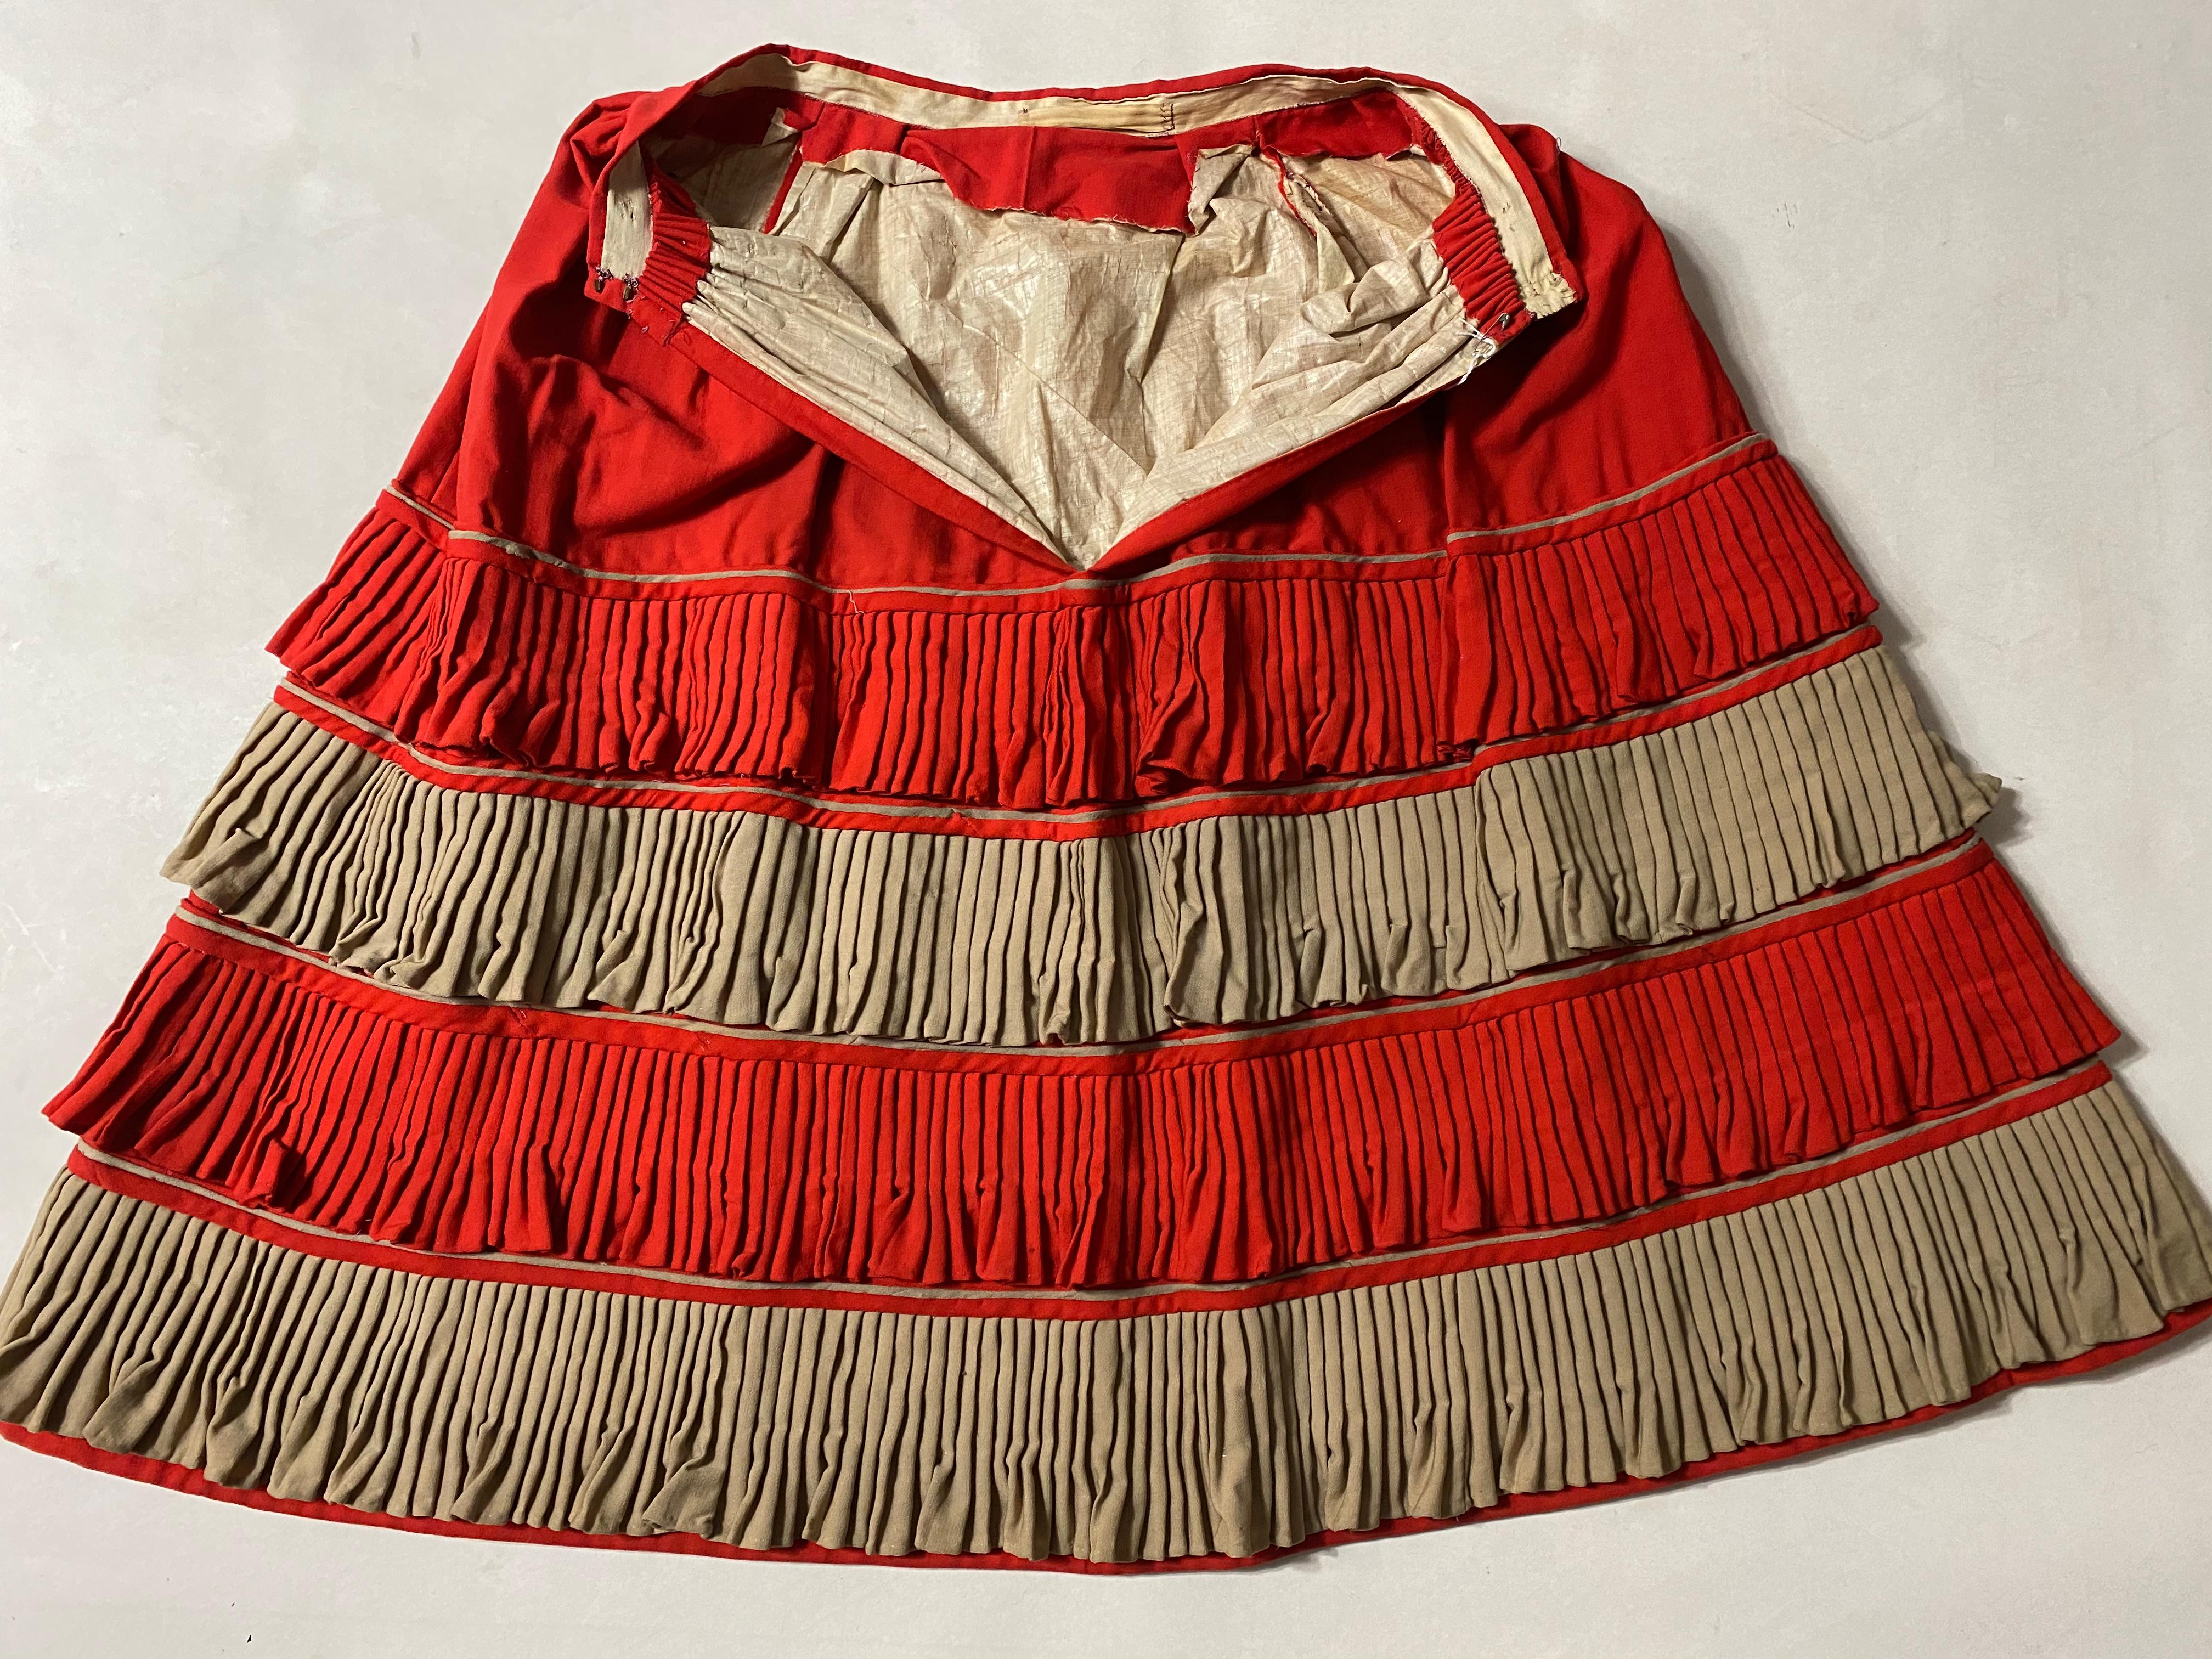 An Historical Circus, Fancy or Memorial Dress in Scarlet Challis USA Circa 1890 For Sale 7